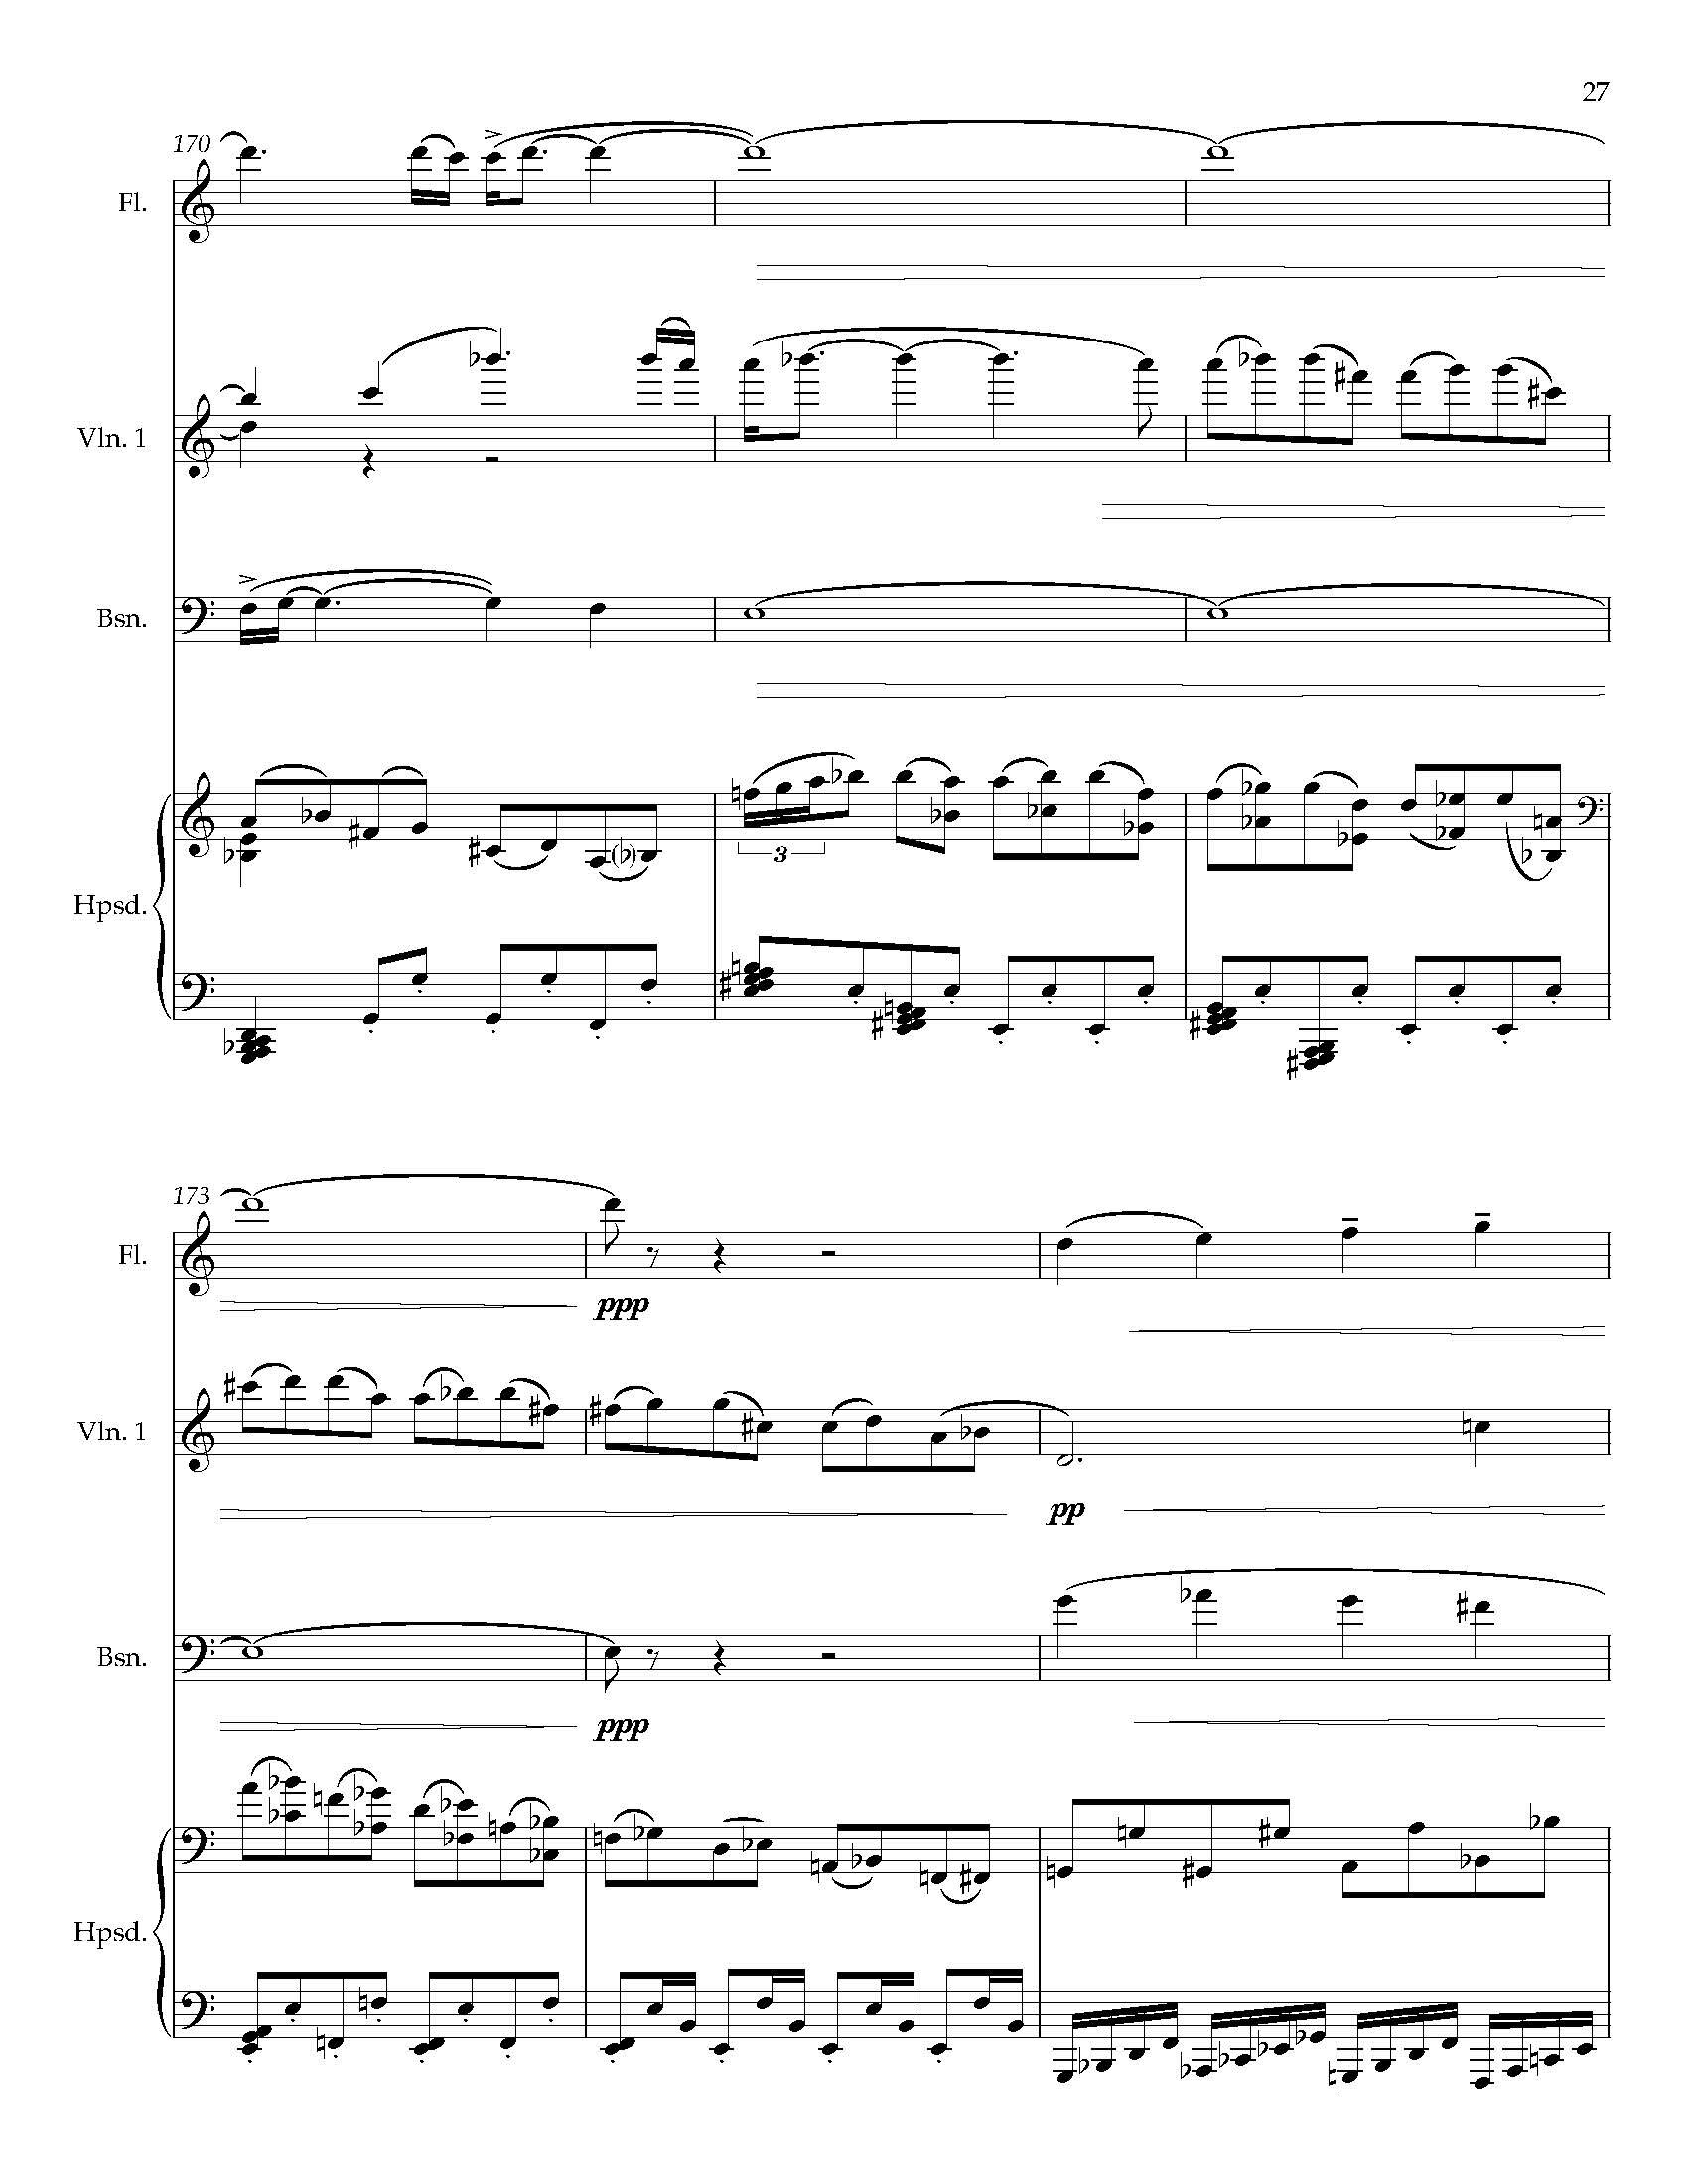 The Hourglass Equation - Complete Score_Page_33.jpg